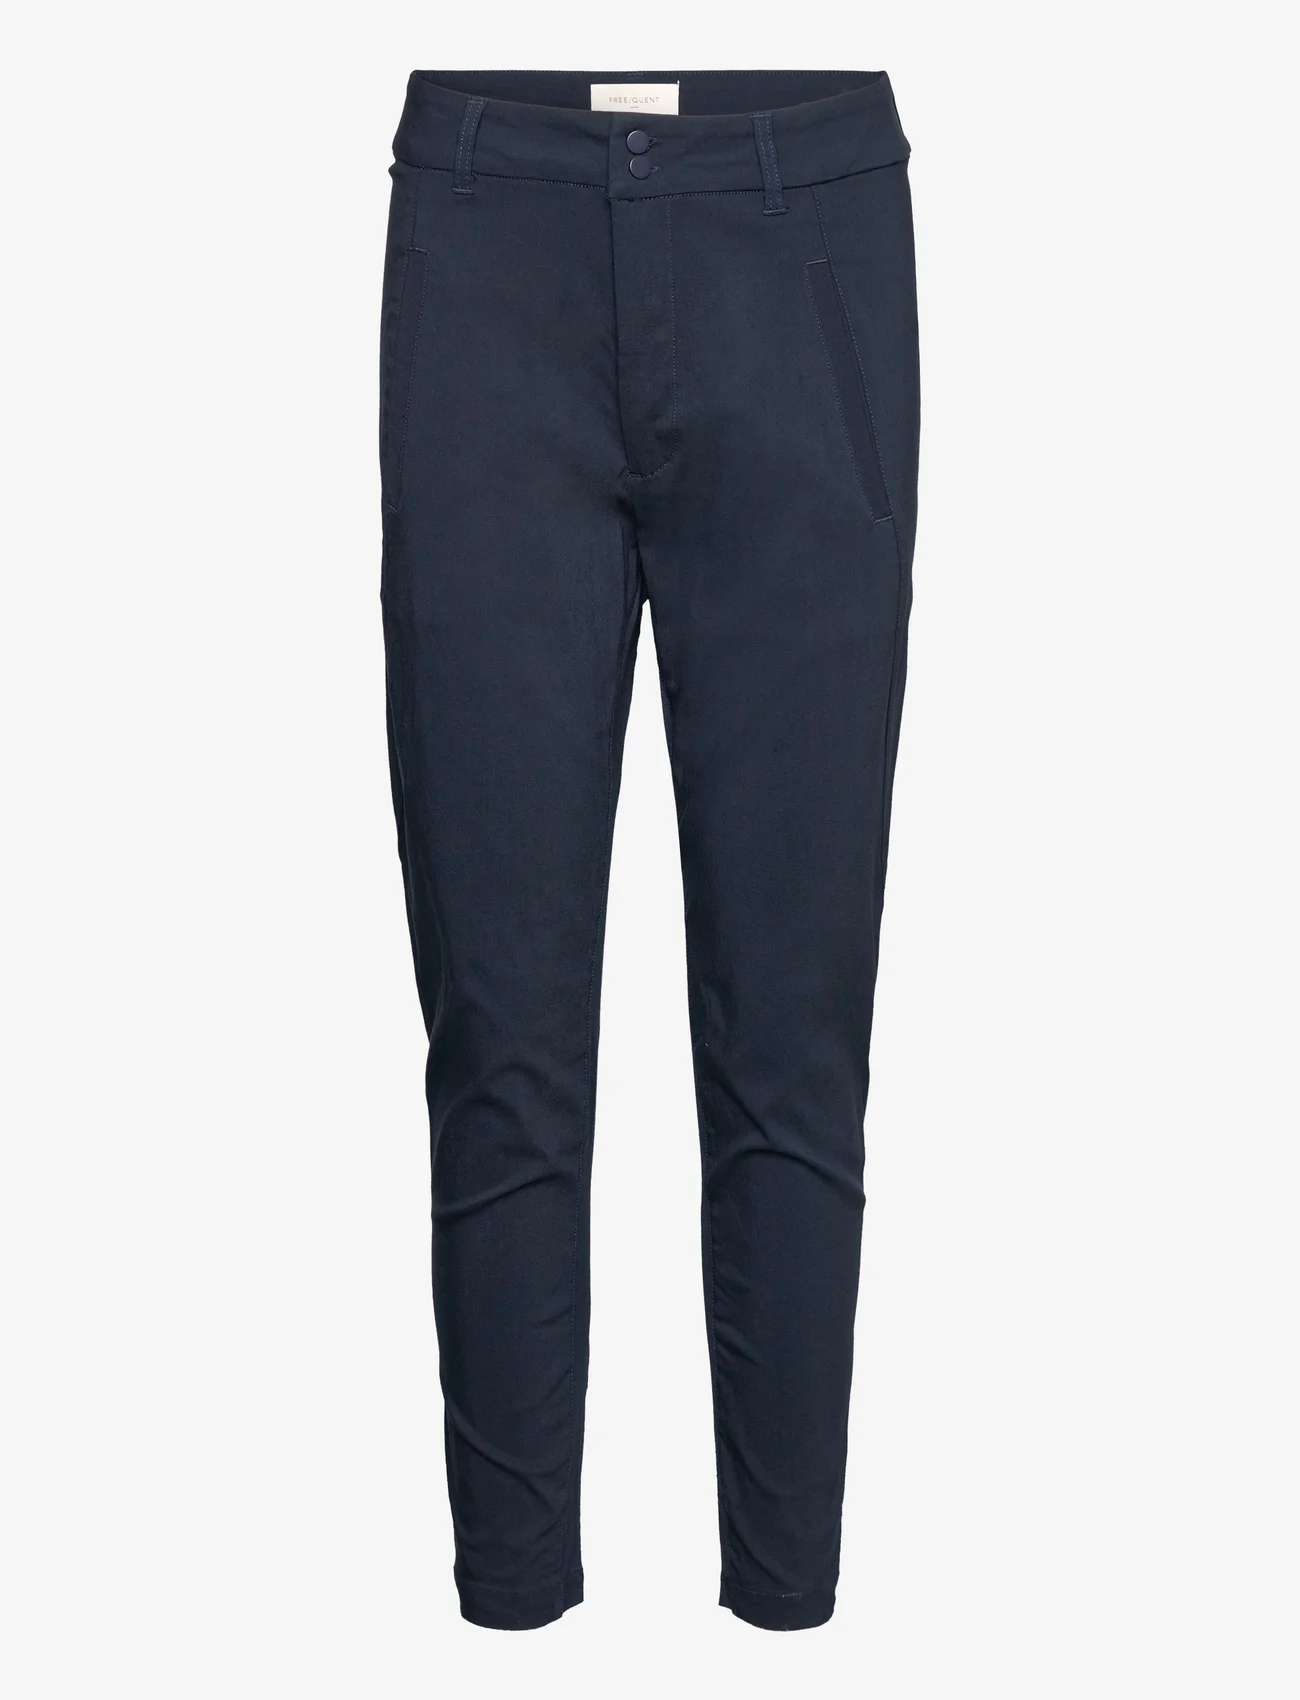 FREE/QUENT - FQJENNY-PA - slim fit trousers - salute 19-4011 - 0